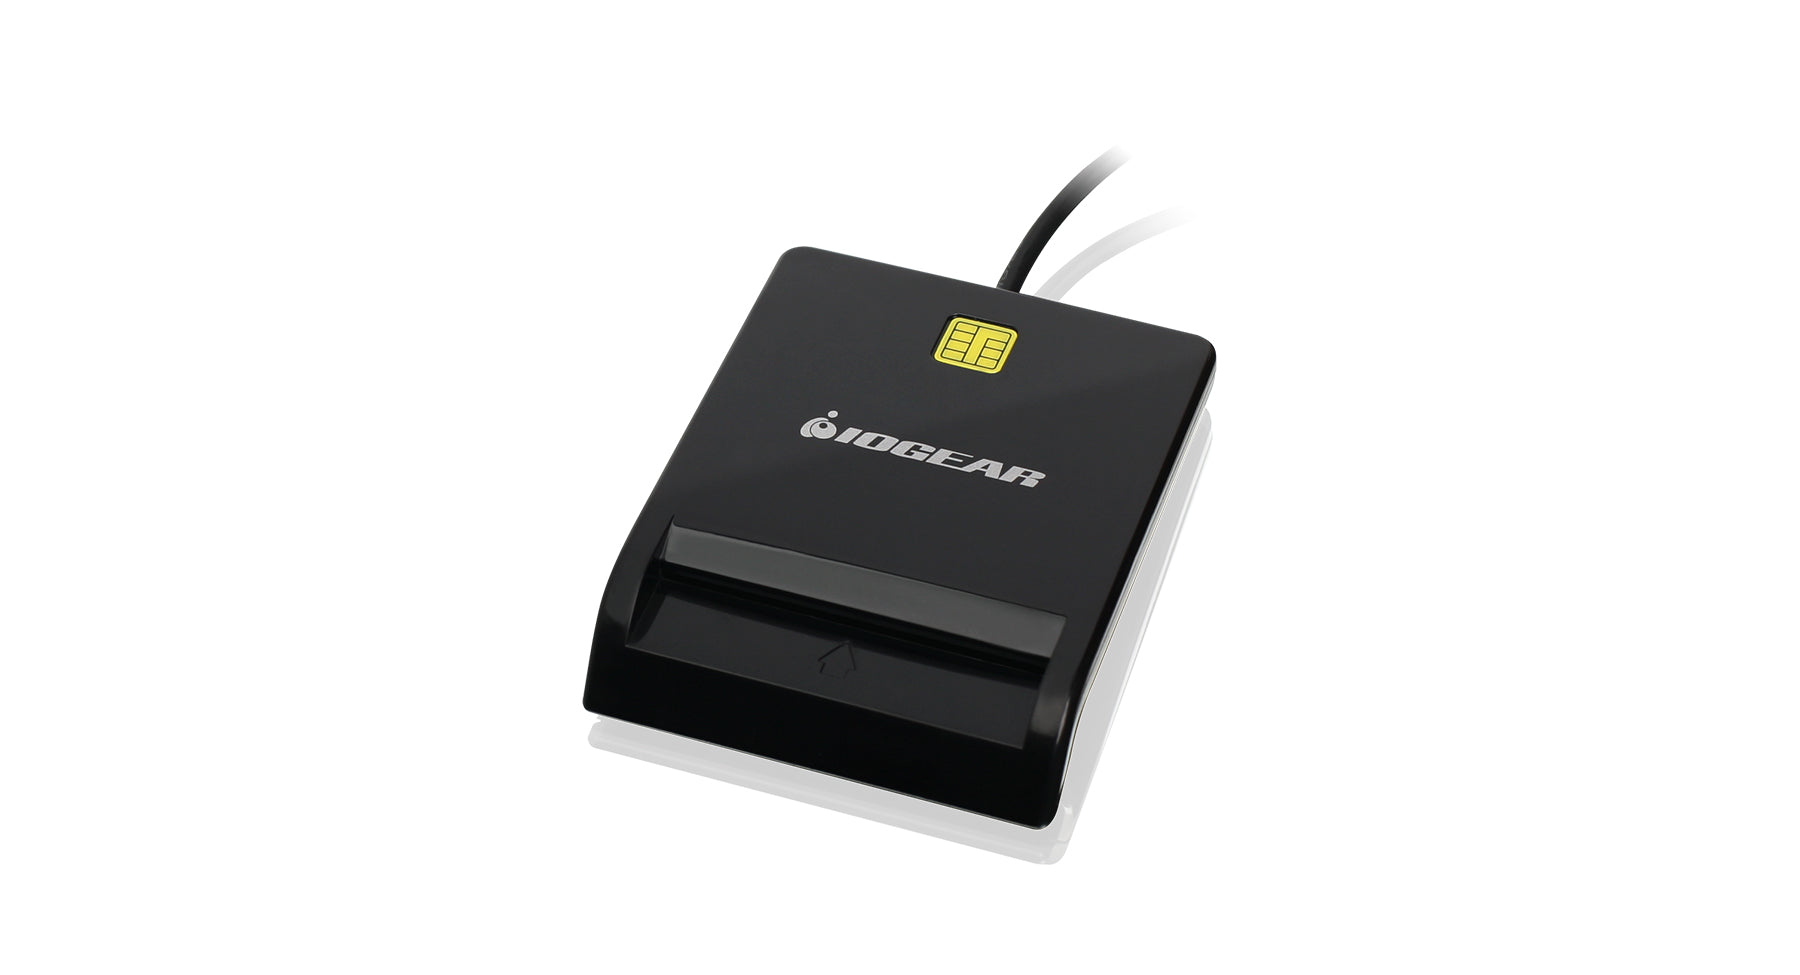 USB Common Access Card (CAC) Reader